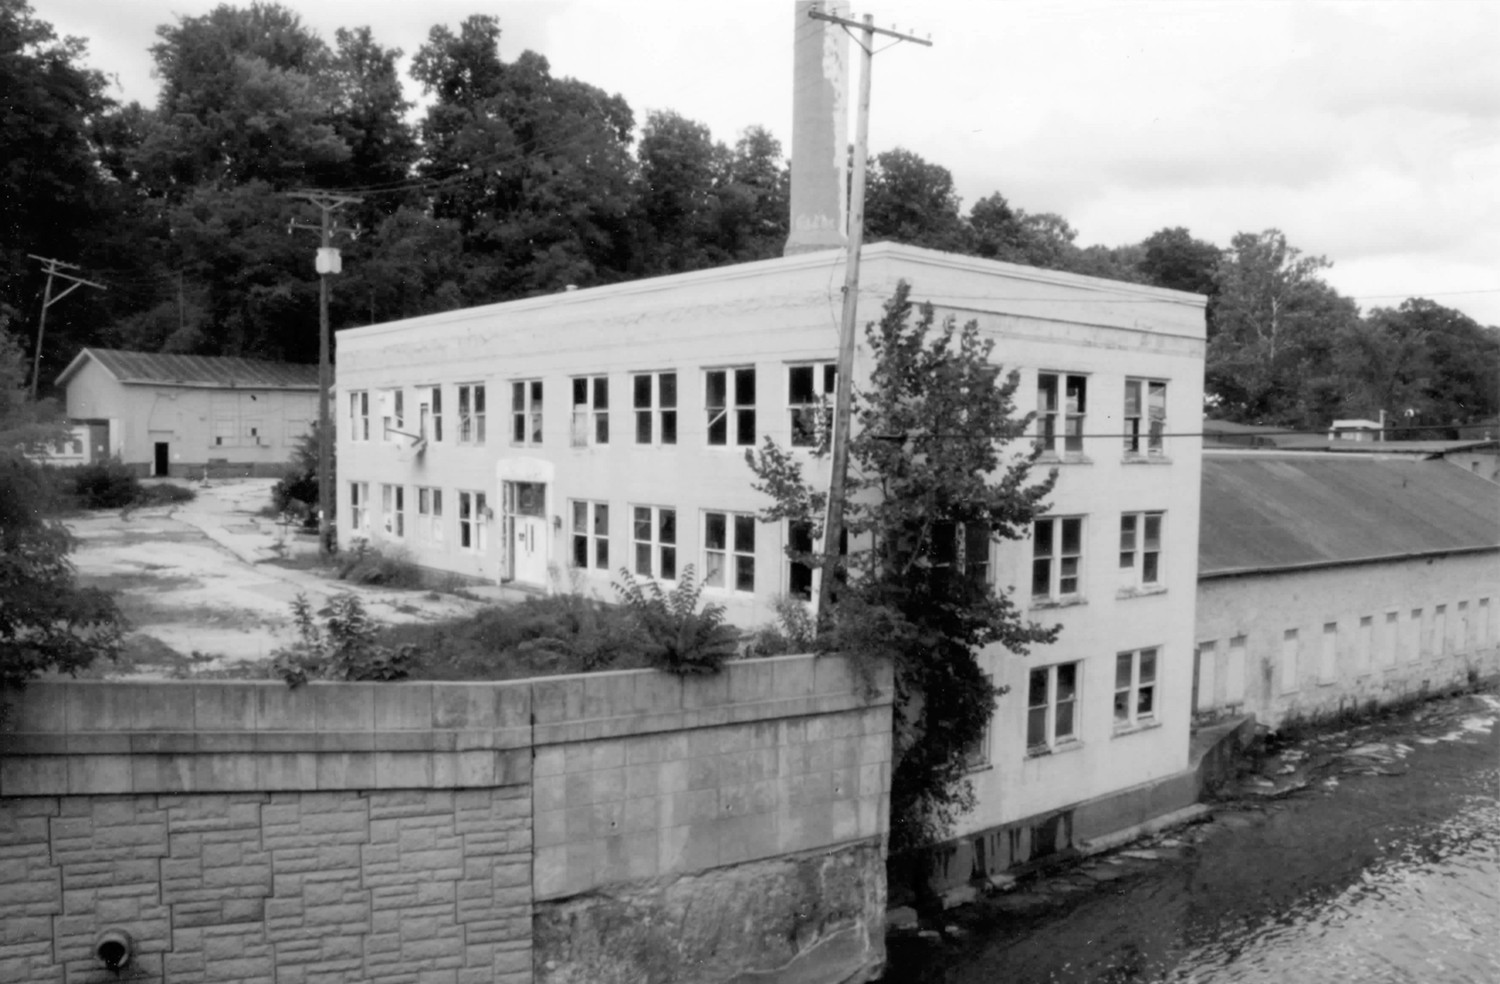 Adams Bag Company Paper Mill and Sack Factory, Chagrin Falls Ohio Paper Mill Buildings and 1923 Office Building, looking north (2012)